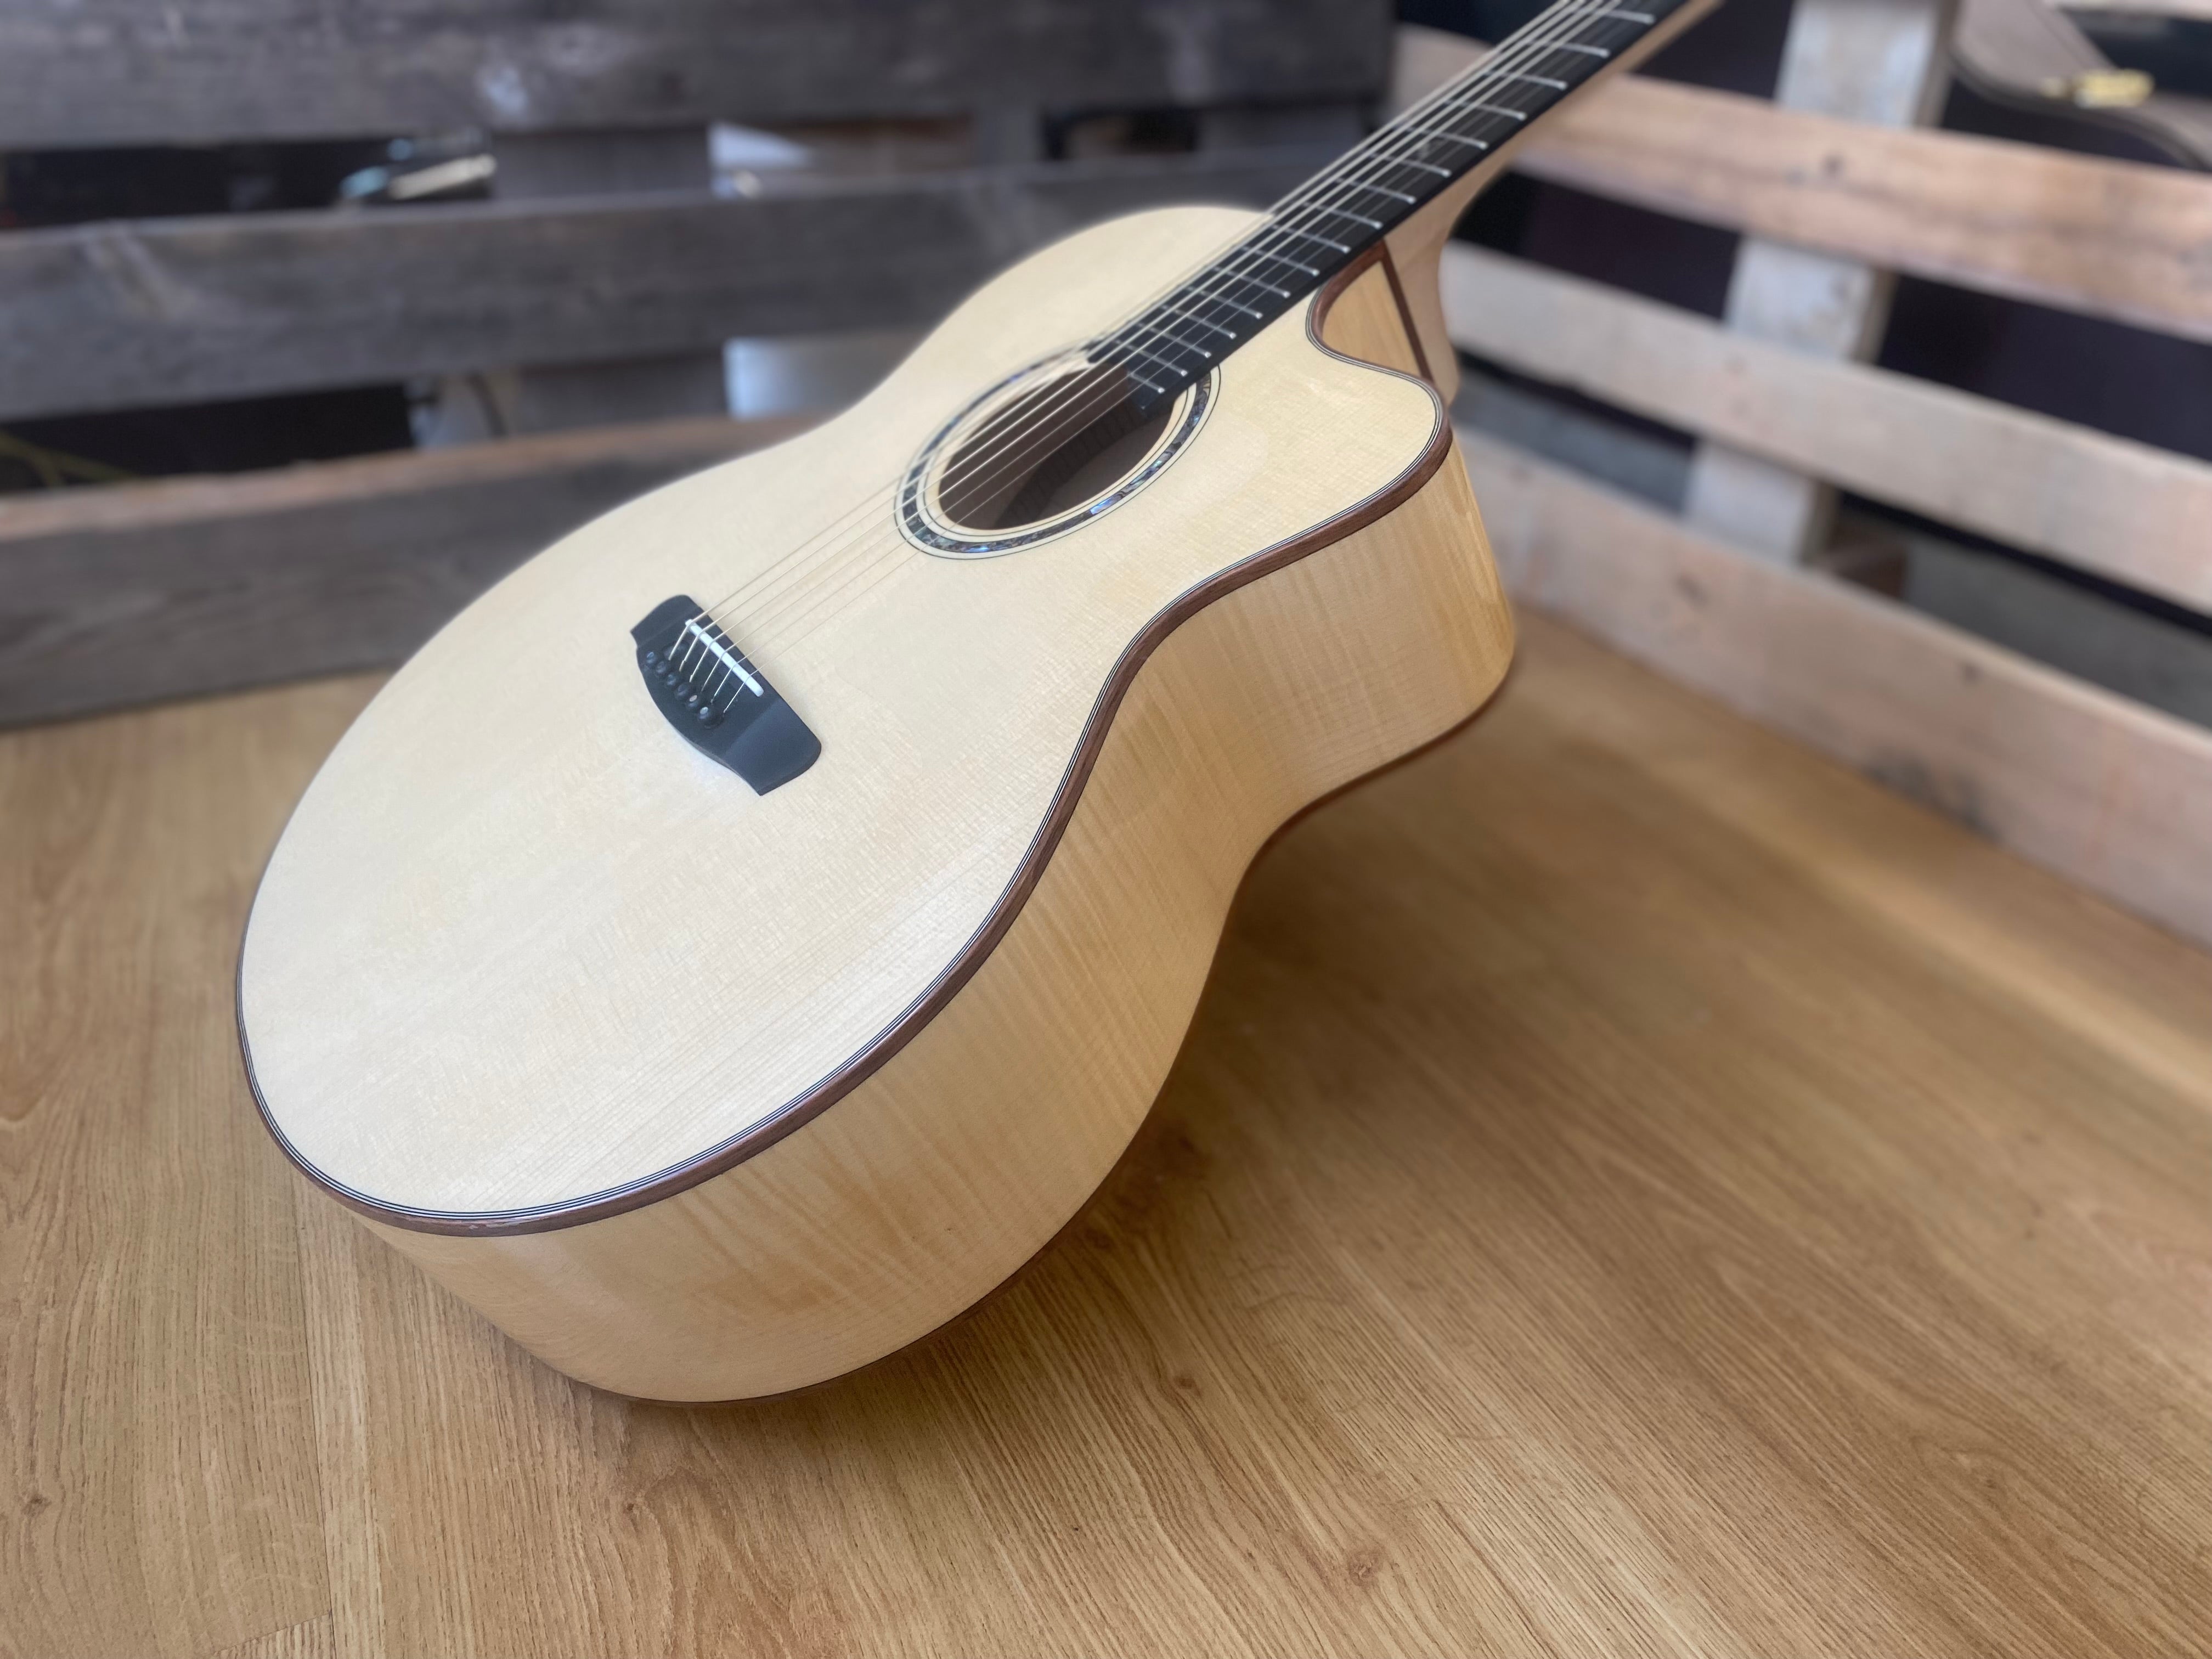 Dowina Master Maple Deluxe JC SWS, Acoustic Guitar for sale at Richards Guitars.